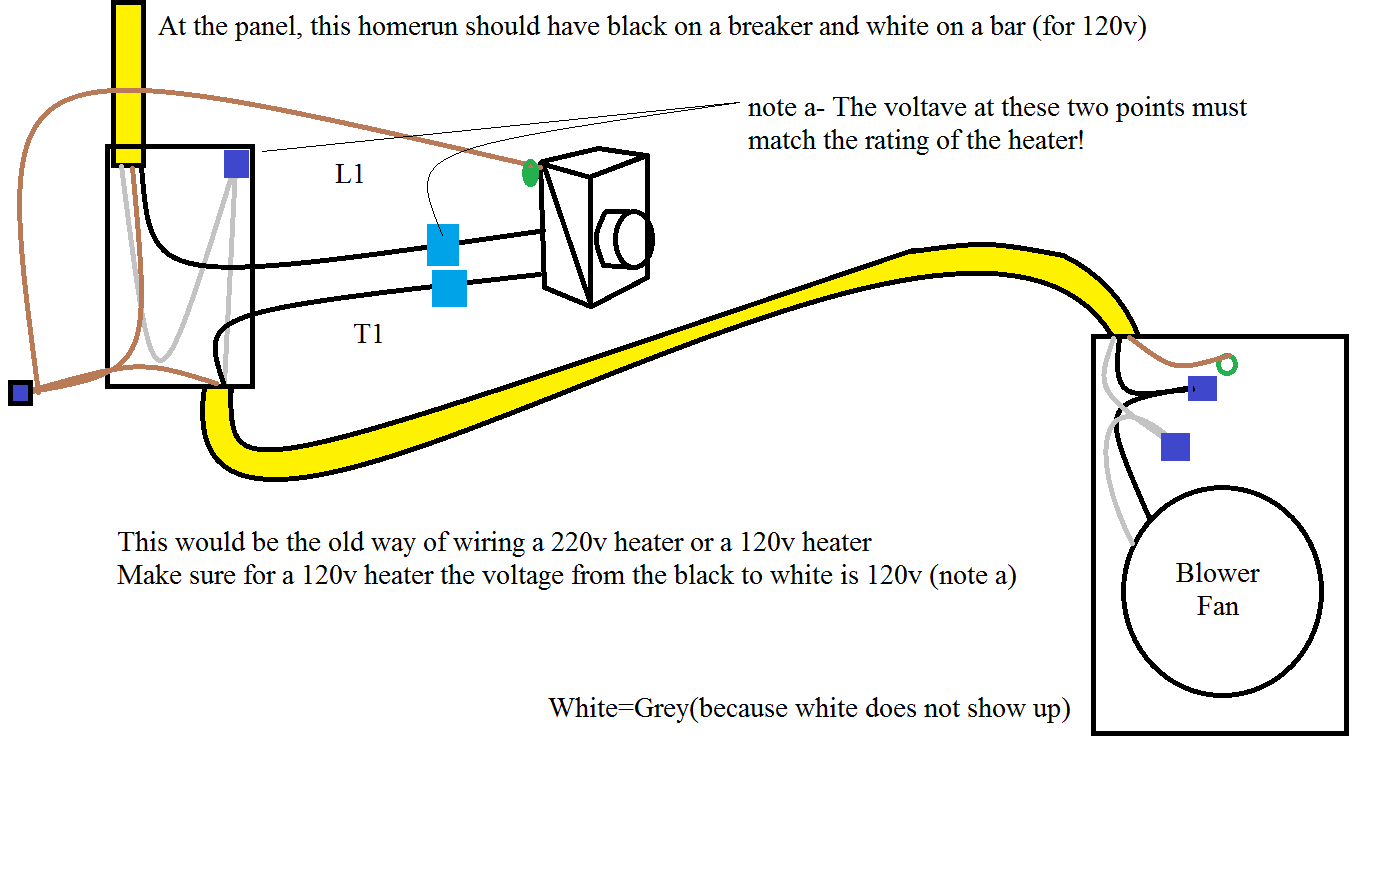 Dimplex Baseboard Heater Thermostat Wiring Diagram from 3.bp.blogspot.com